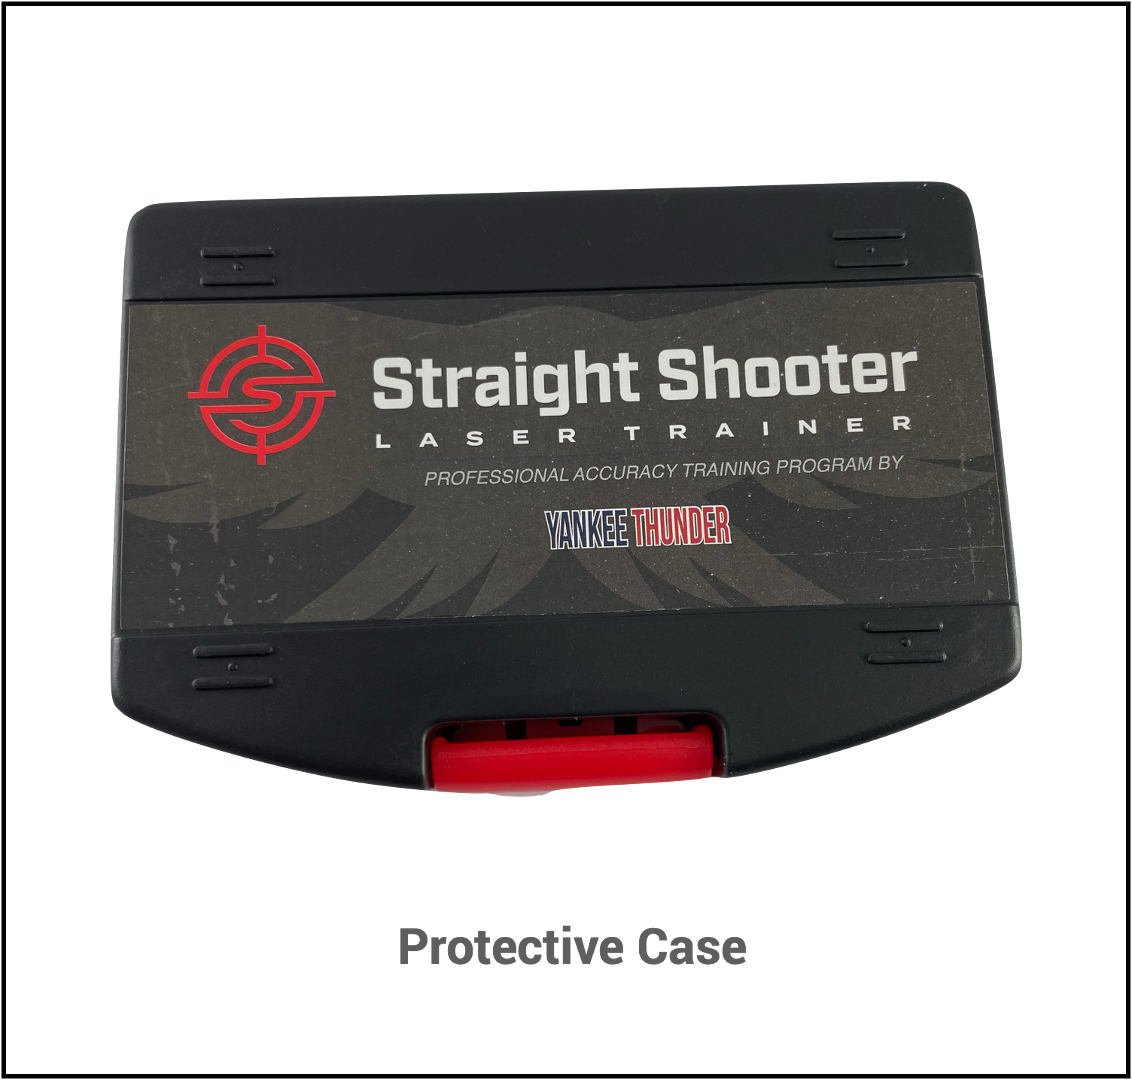 Straight Shooter Laser Trainer Protective Case